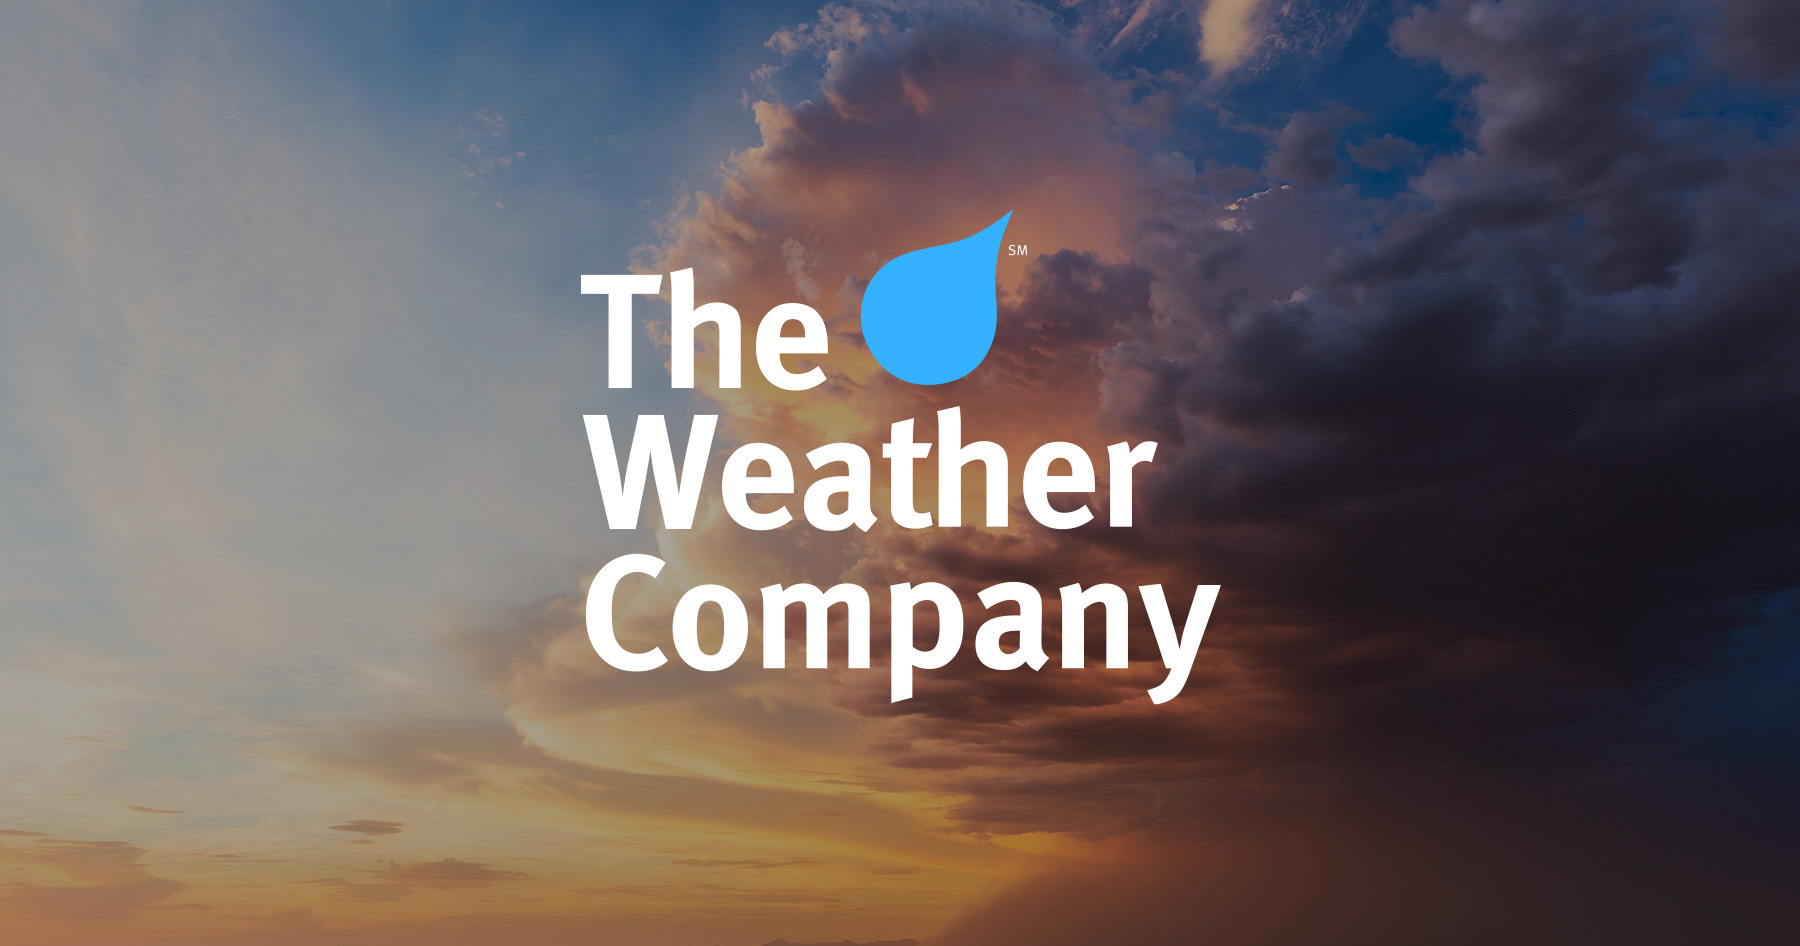 The Weather Company Logo over clouds